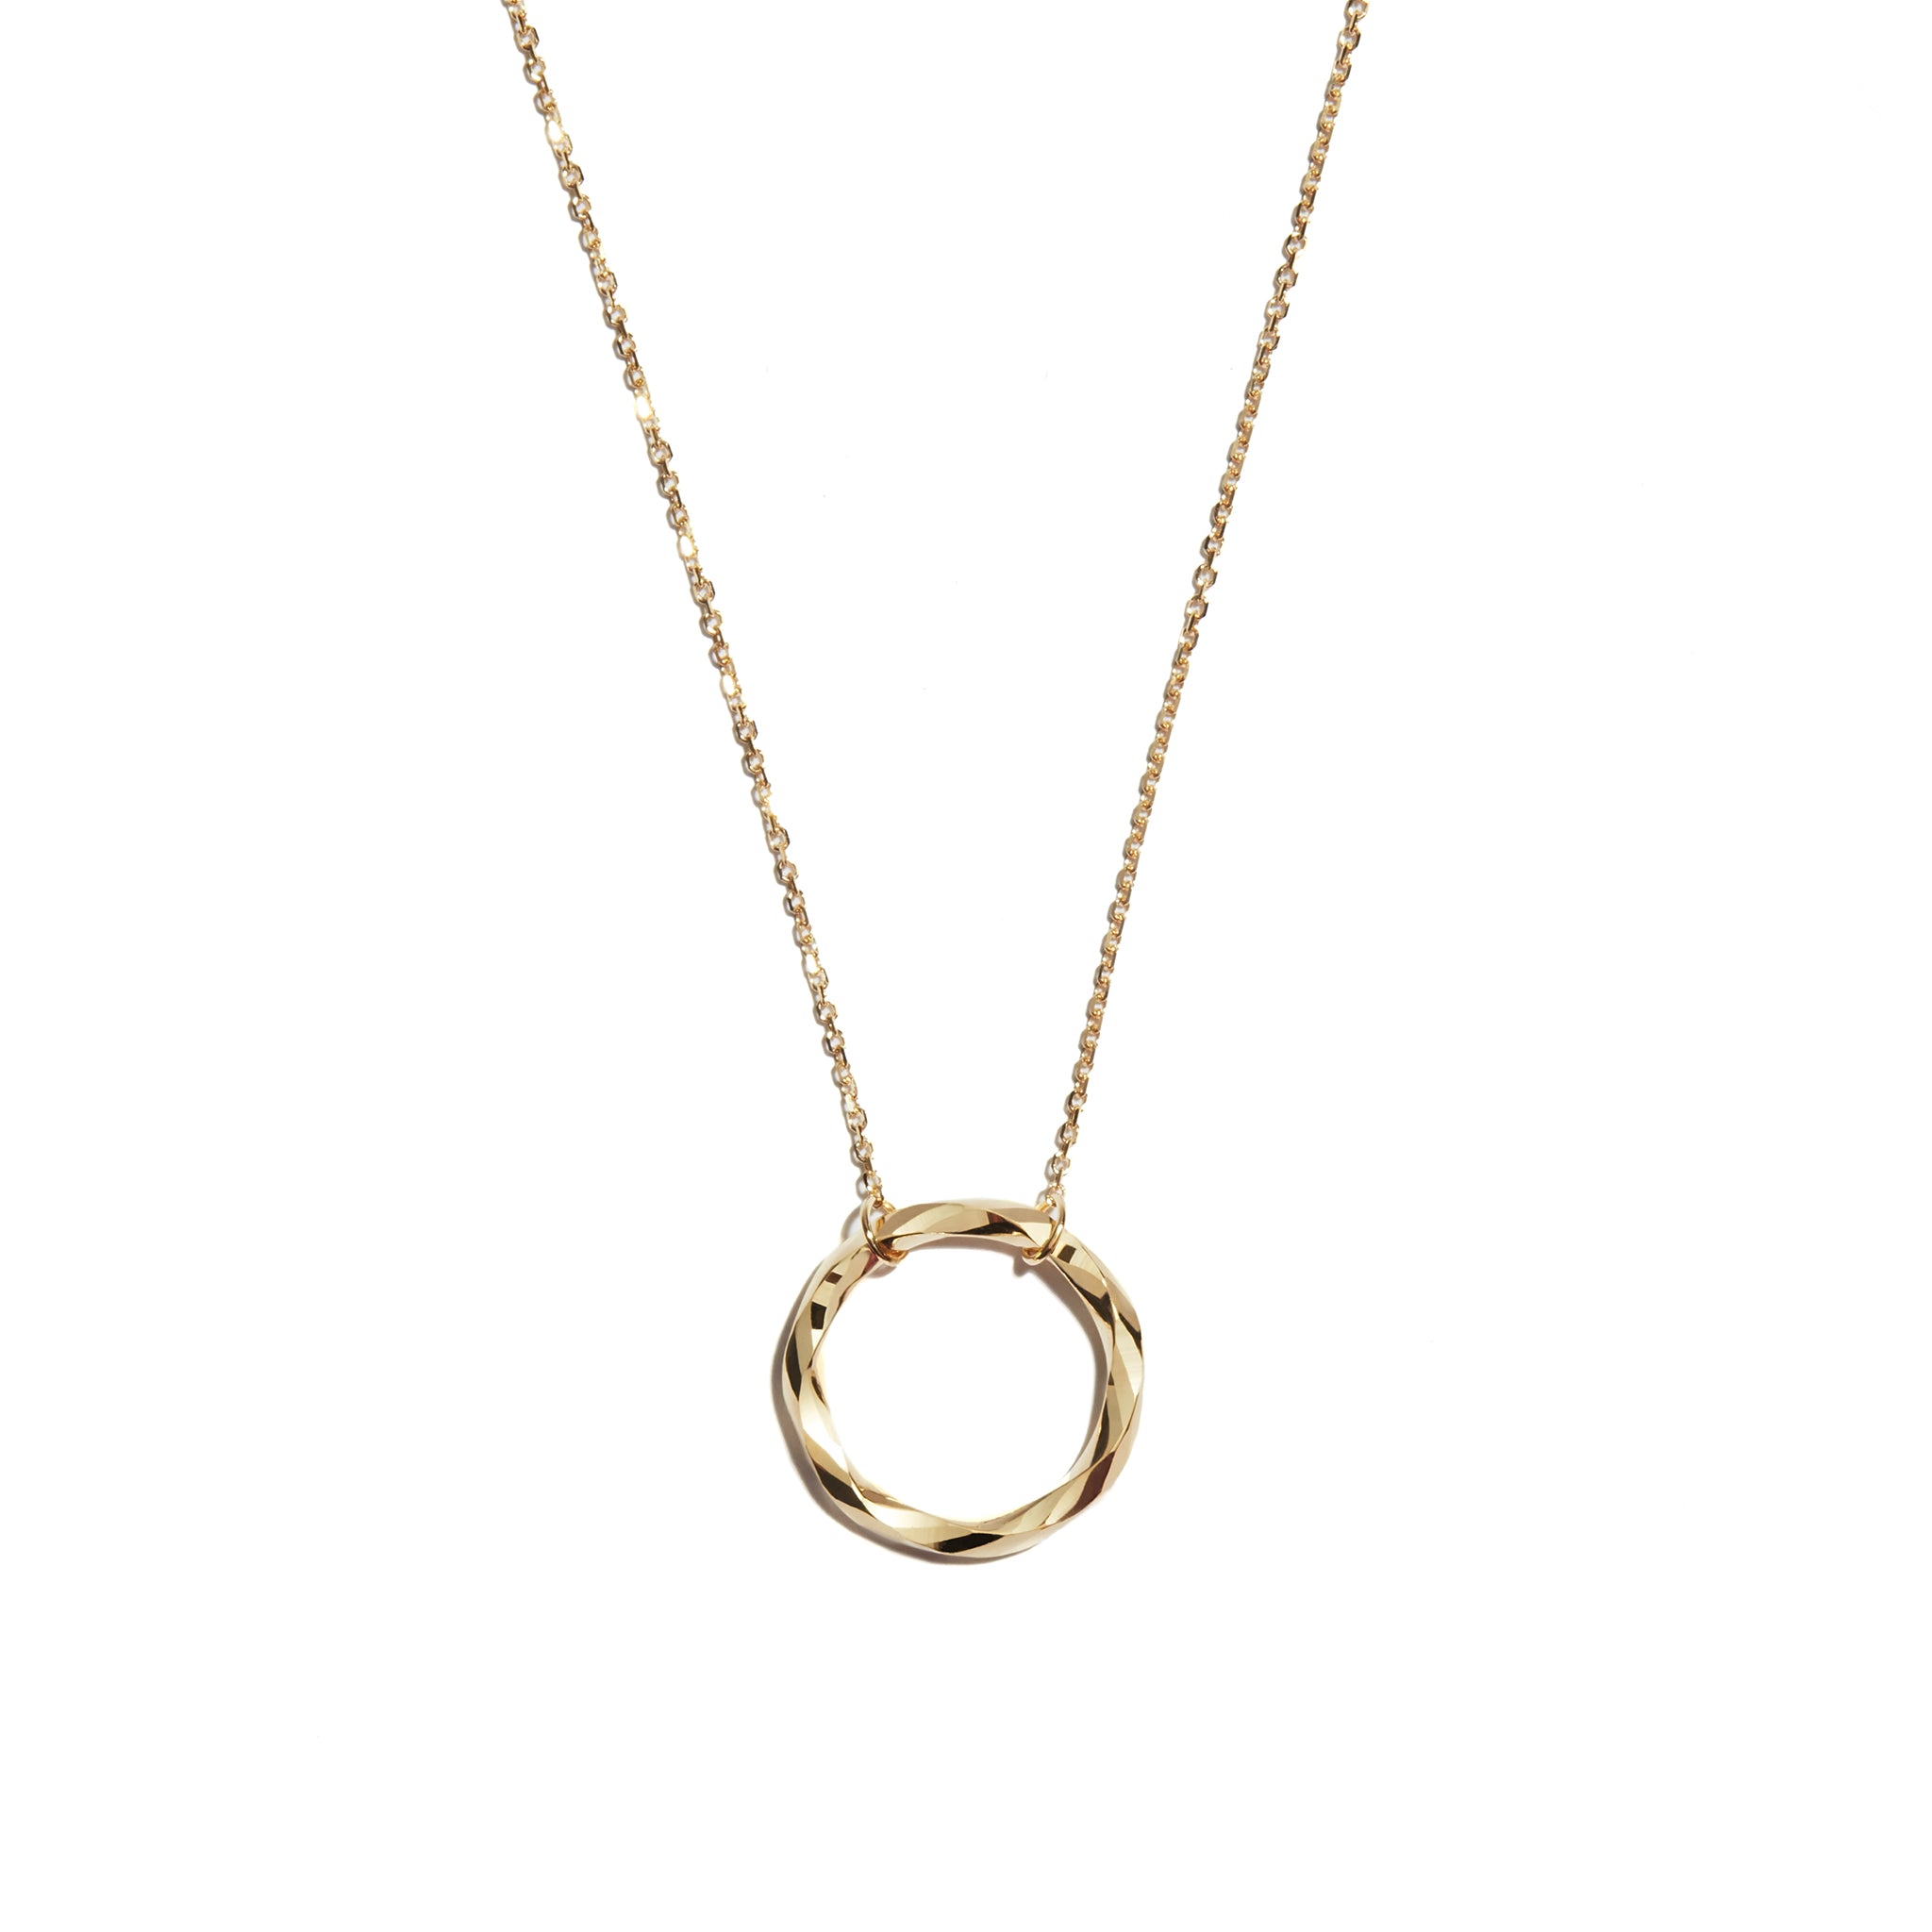 Enhance your style with the 9 carat yellow gold diamond cut open circle necklace. This chic accessory features a dazzling open circle design with intricade diamond-cut detailing, adding a touch of sophistication and sparkle to any ensemble.